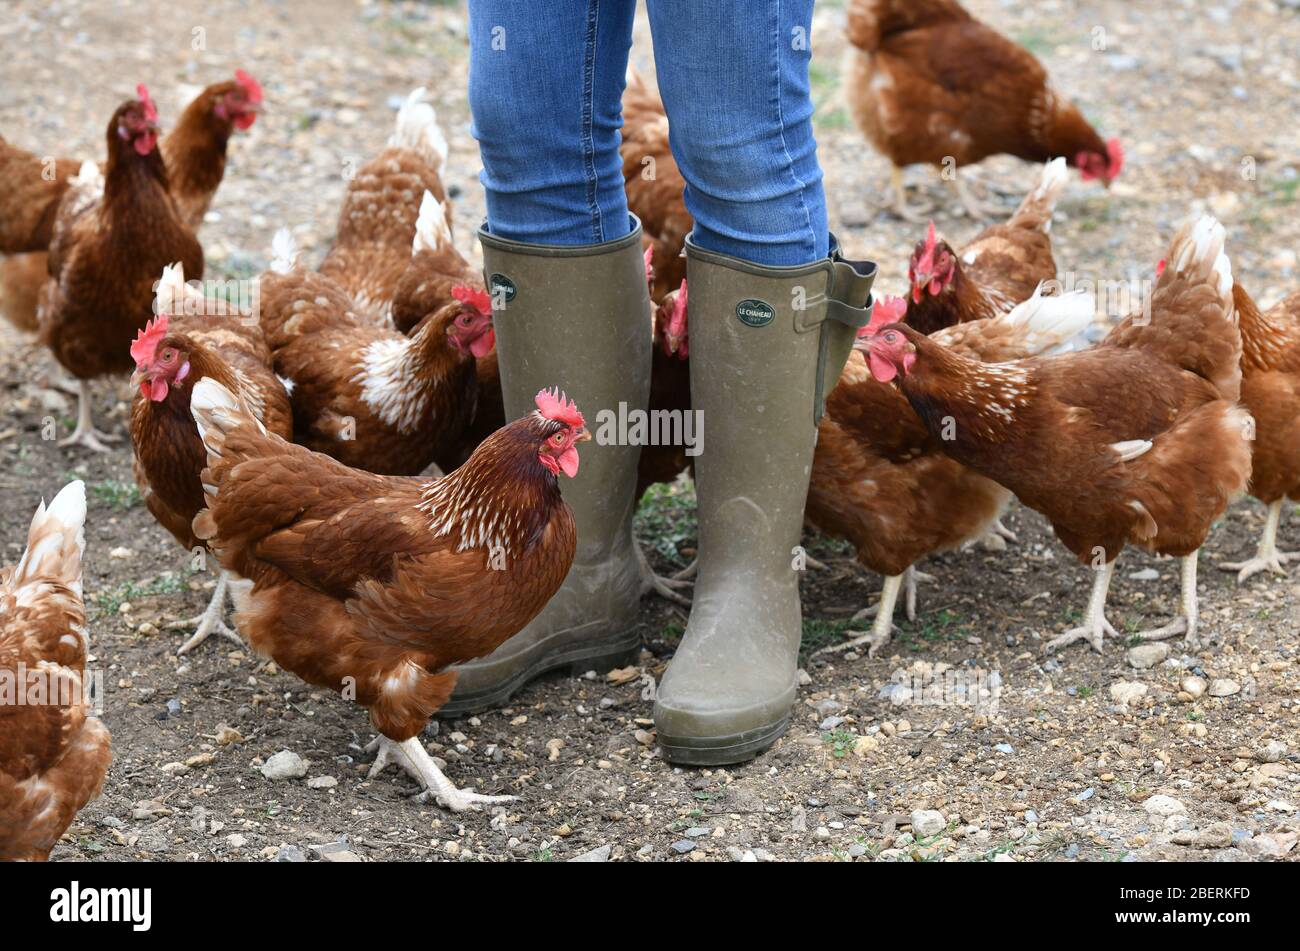 A poultry farmer wearing rubber welly boots walking among a crowd of foraging hens on a Poultry farm in Oxfordshire. Stock Photo